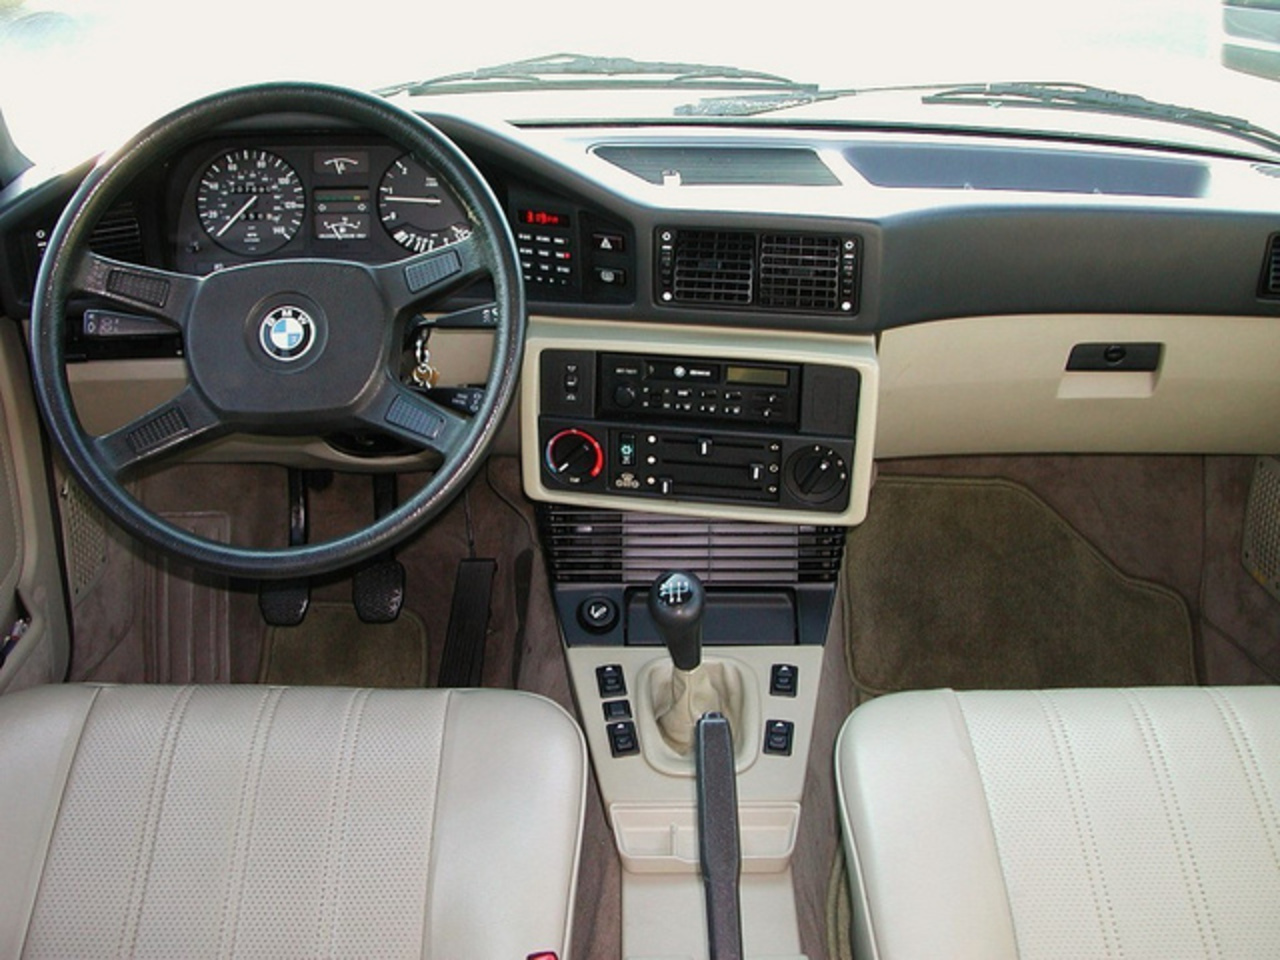 BMW 5-Series (E28) | Flickr - Photo Sharing!